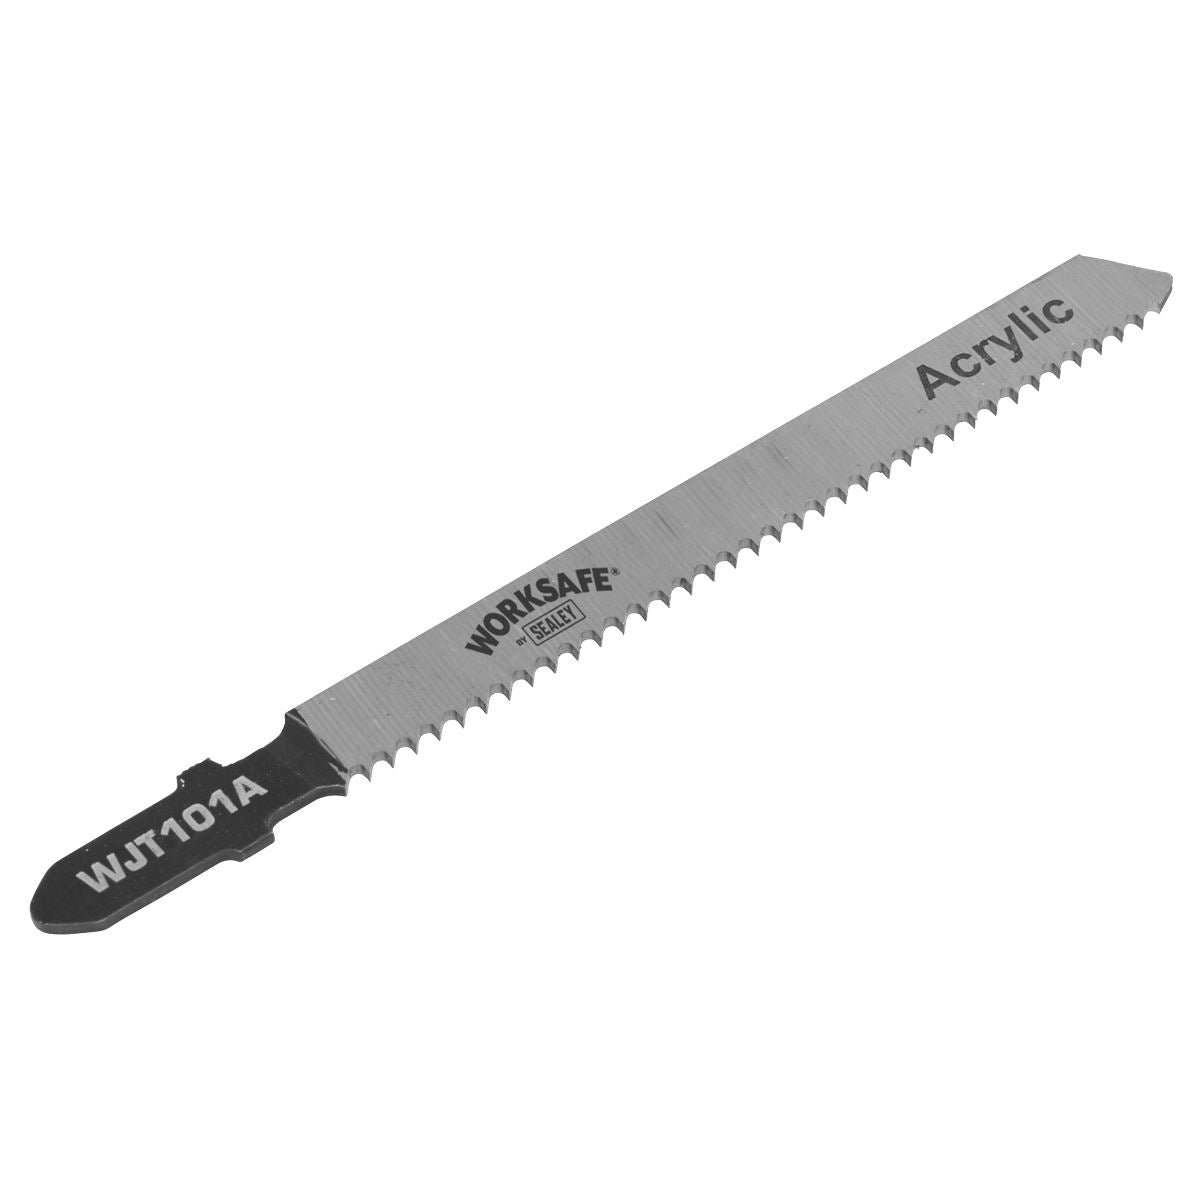 Worksafe by Sealey Jigsaw Blade Metal 75mm 12tpi - Pack of 5